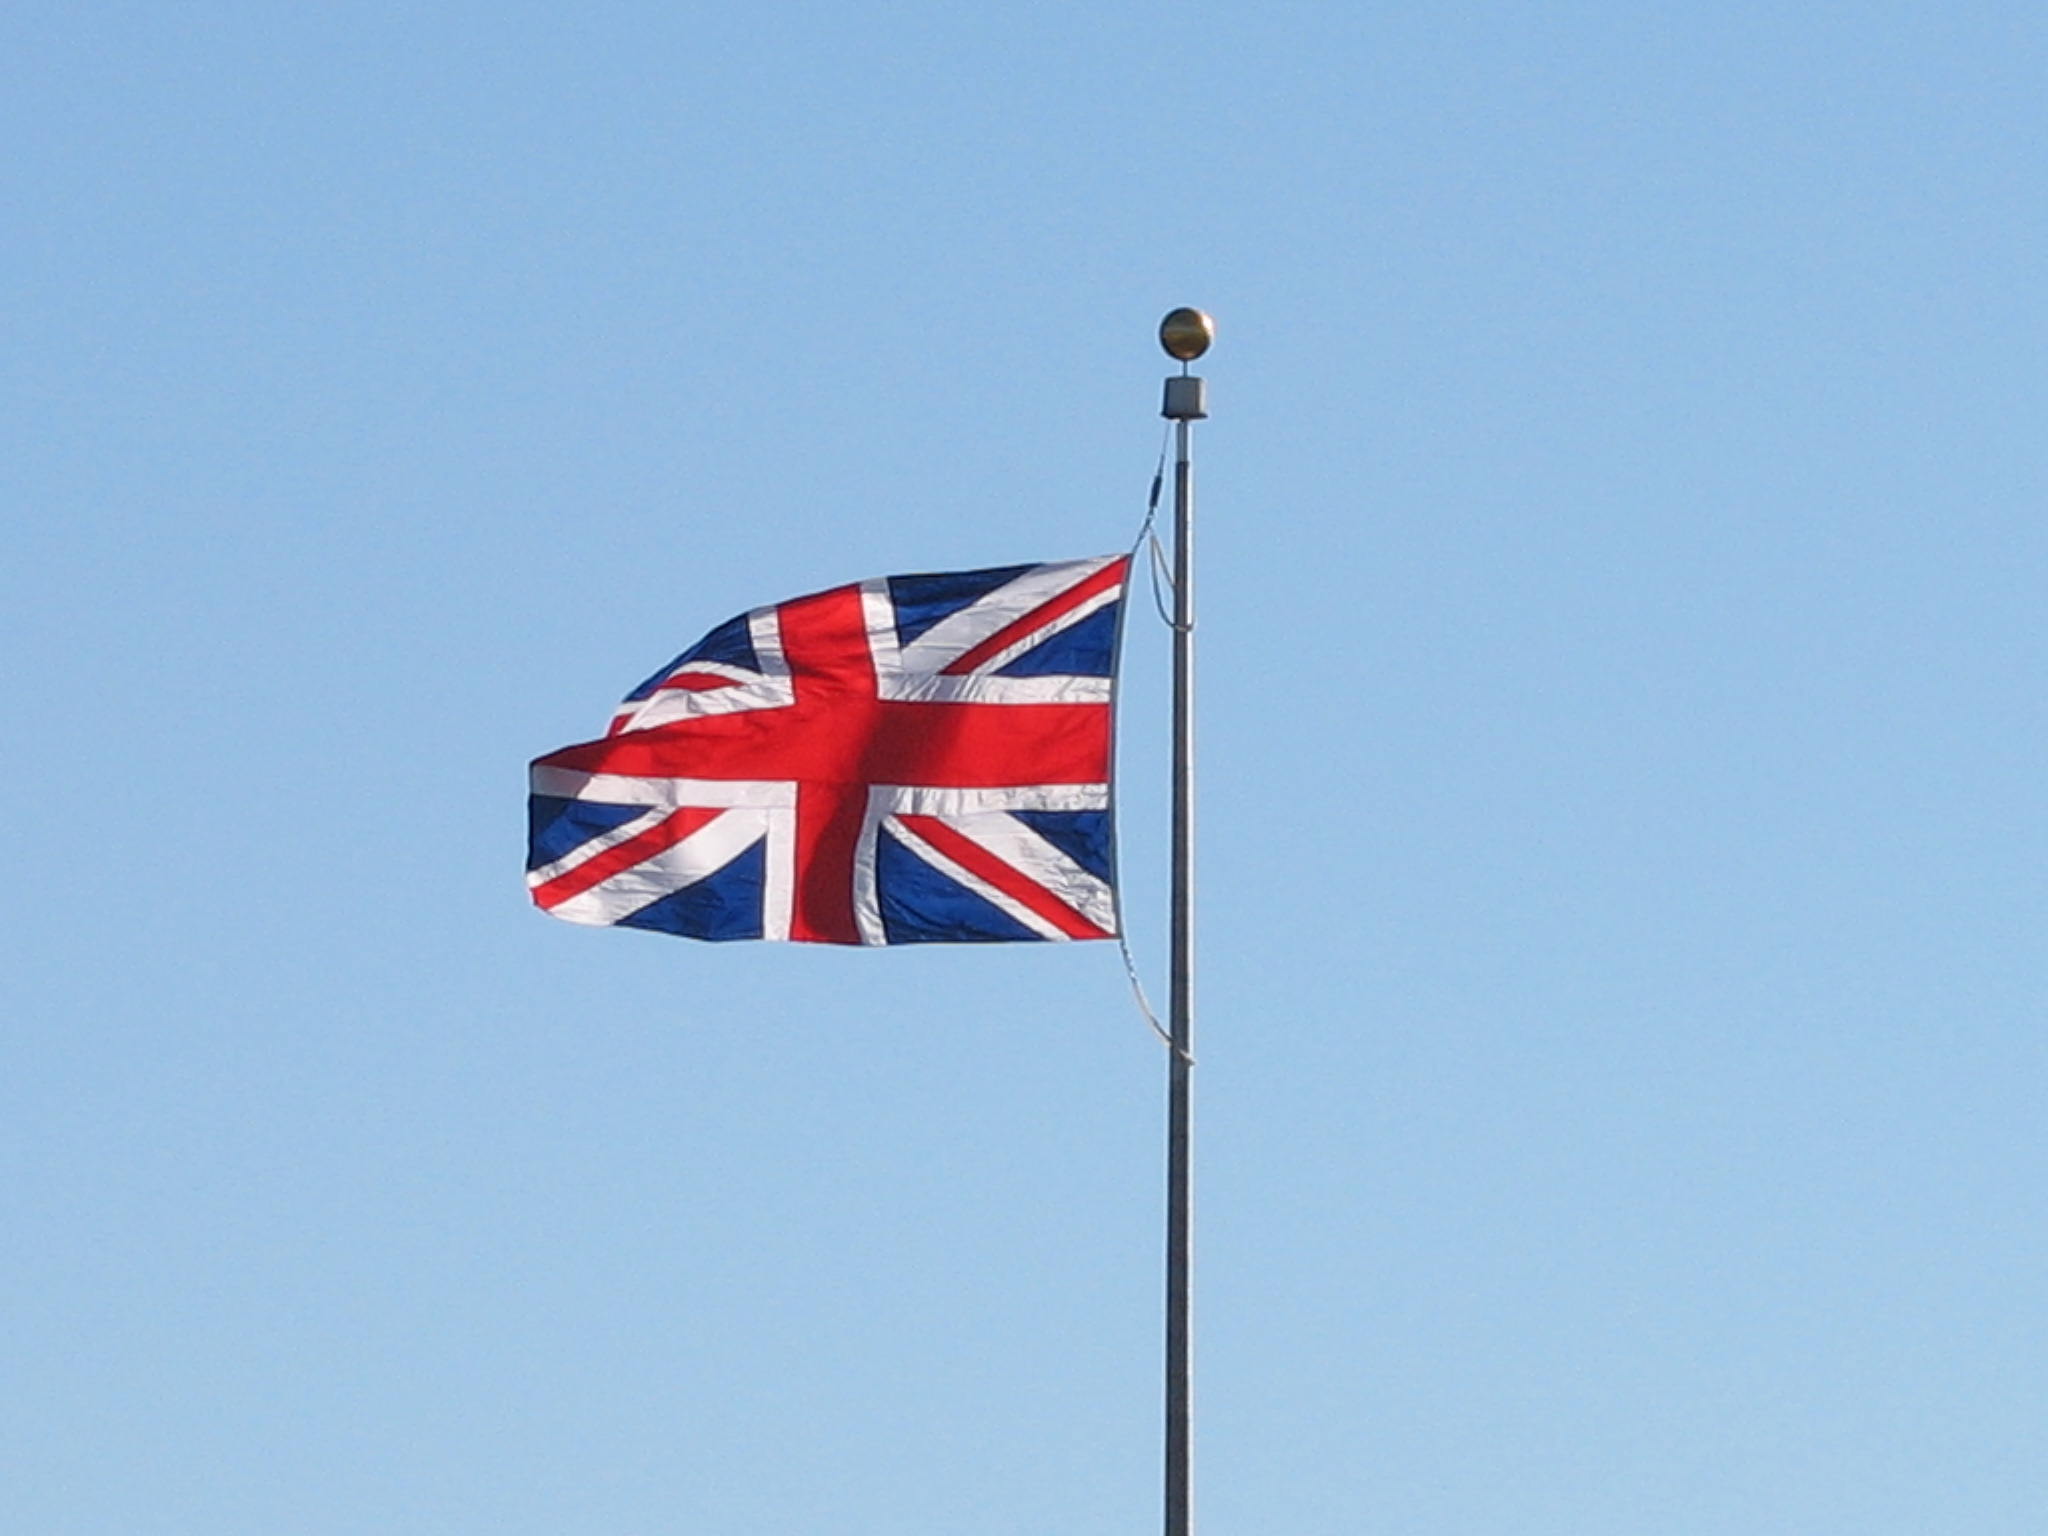 a flag flying in the wind next to a street light